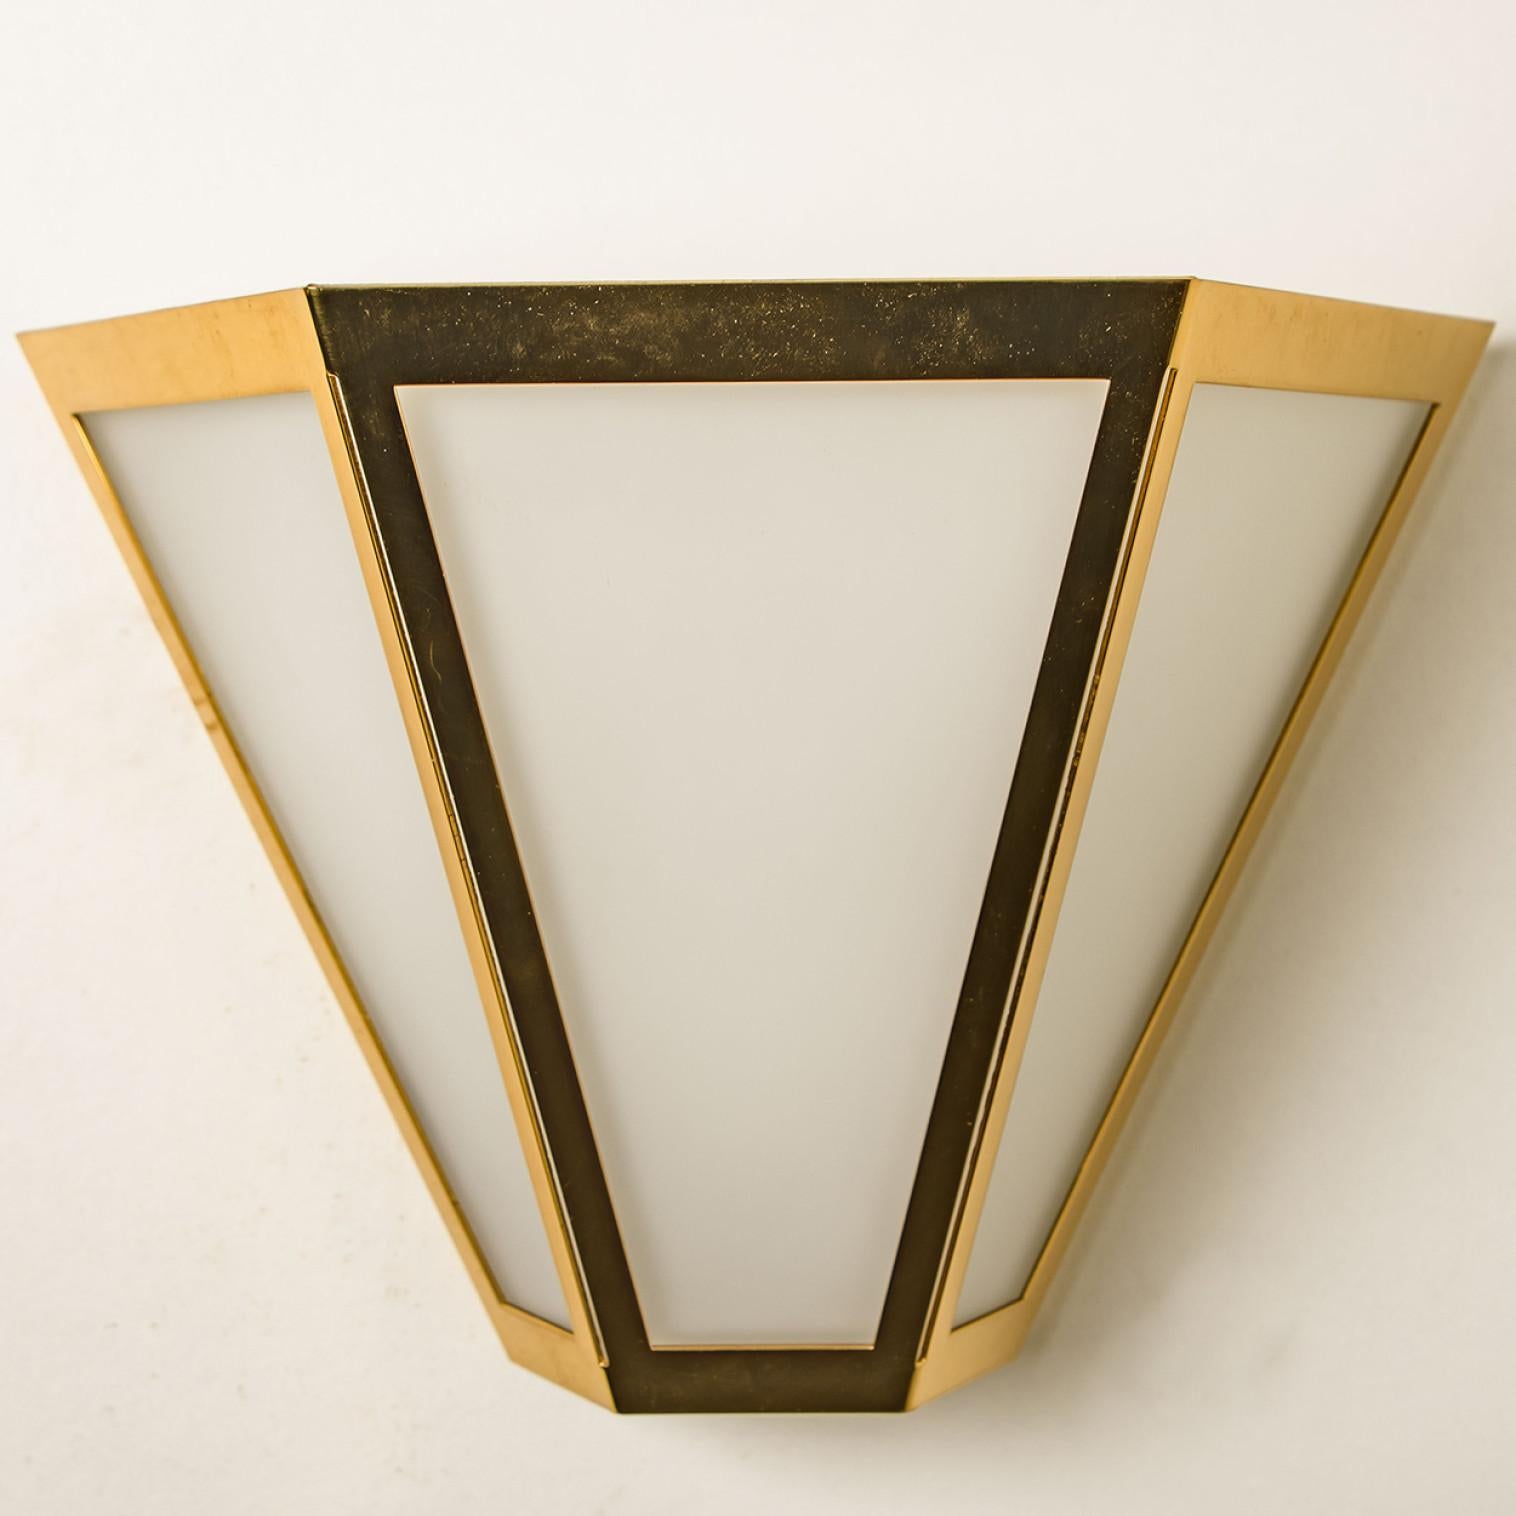 Pyramid shaped wall lights in white opaline glass with brass details. Manufactured by Glashütte Limburg in Germany during the 1970s. (early 1970s). Nice craftsmanship. Minimal, geometric and simply shaped design.

Please note the price is for 1